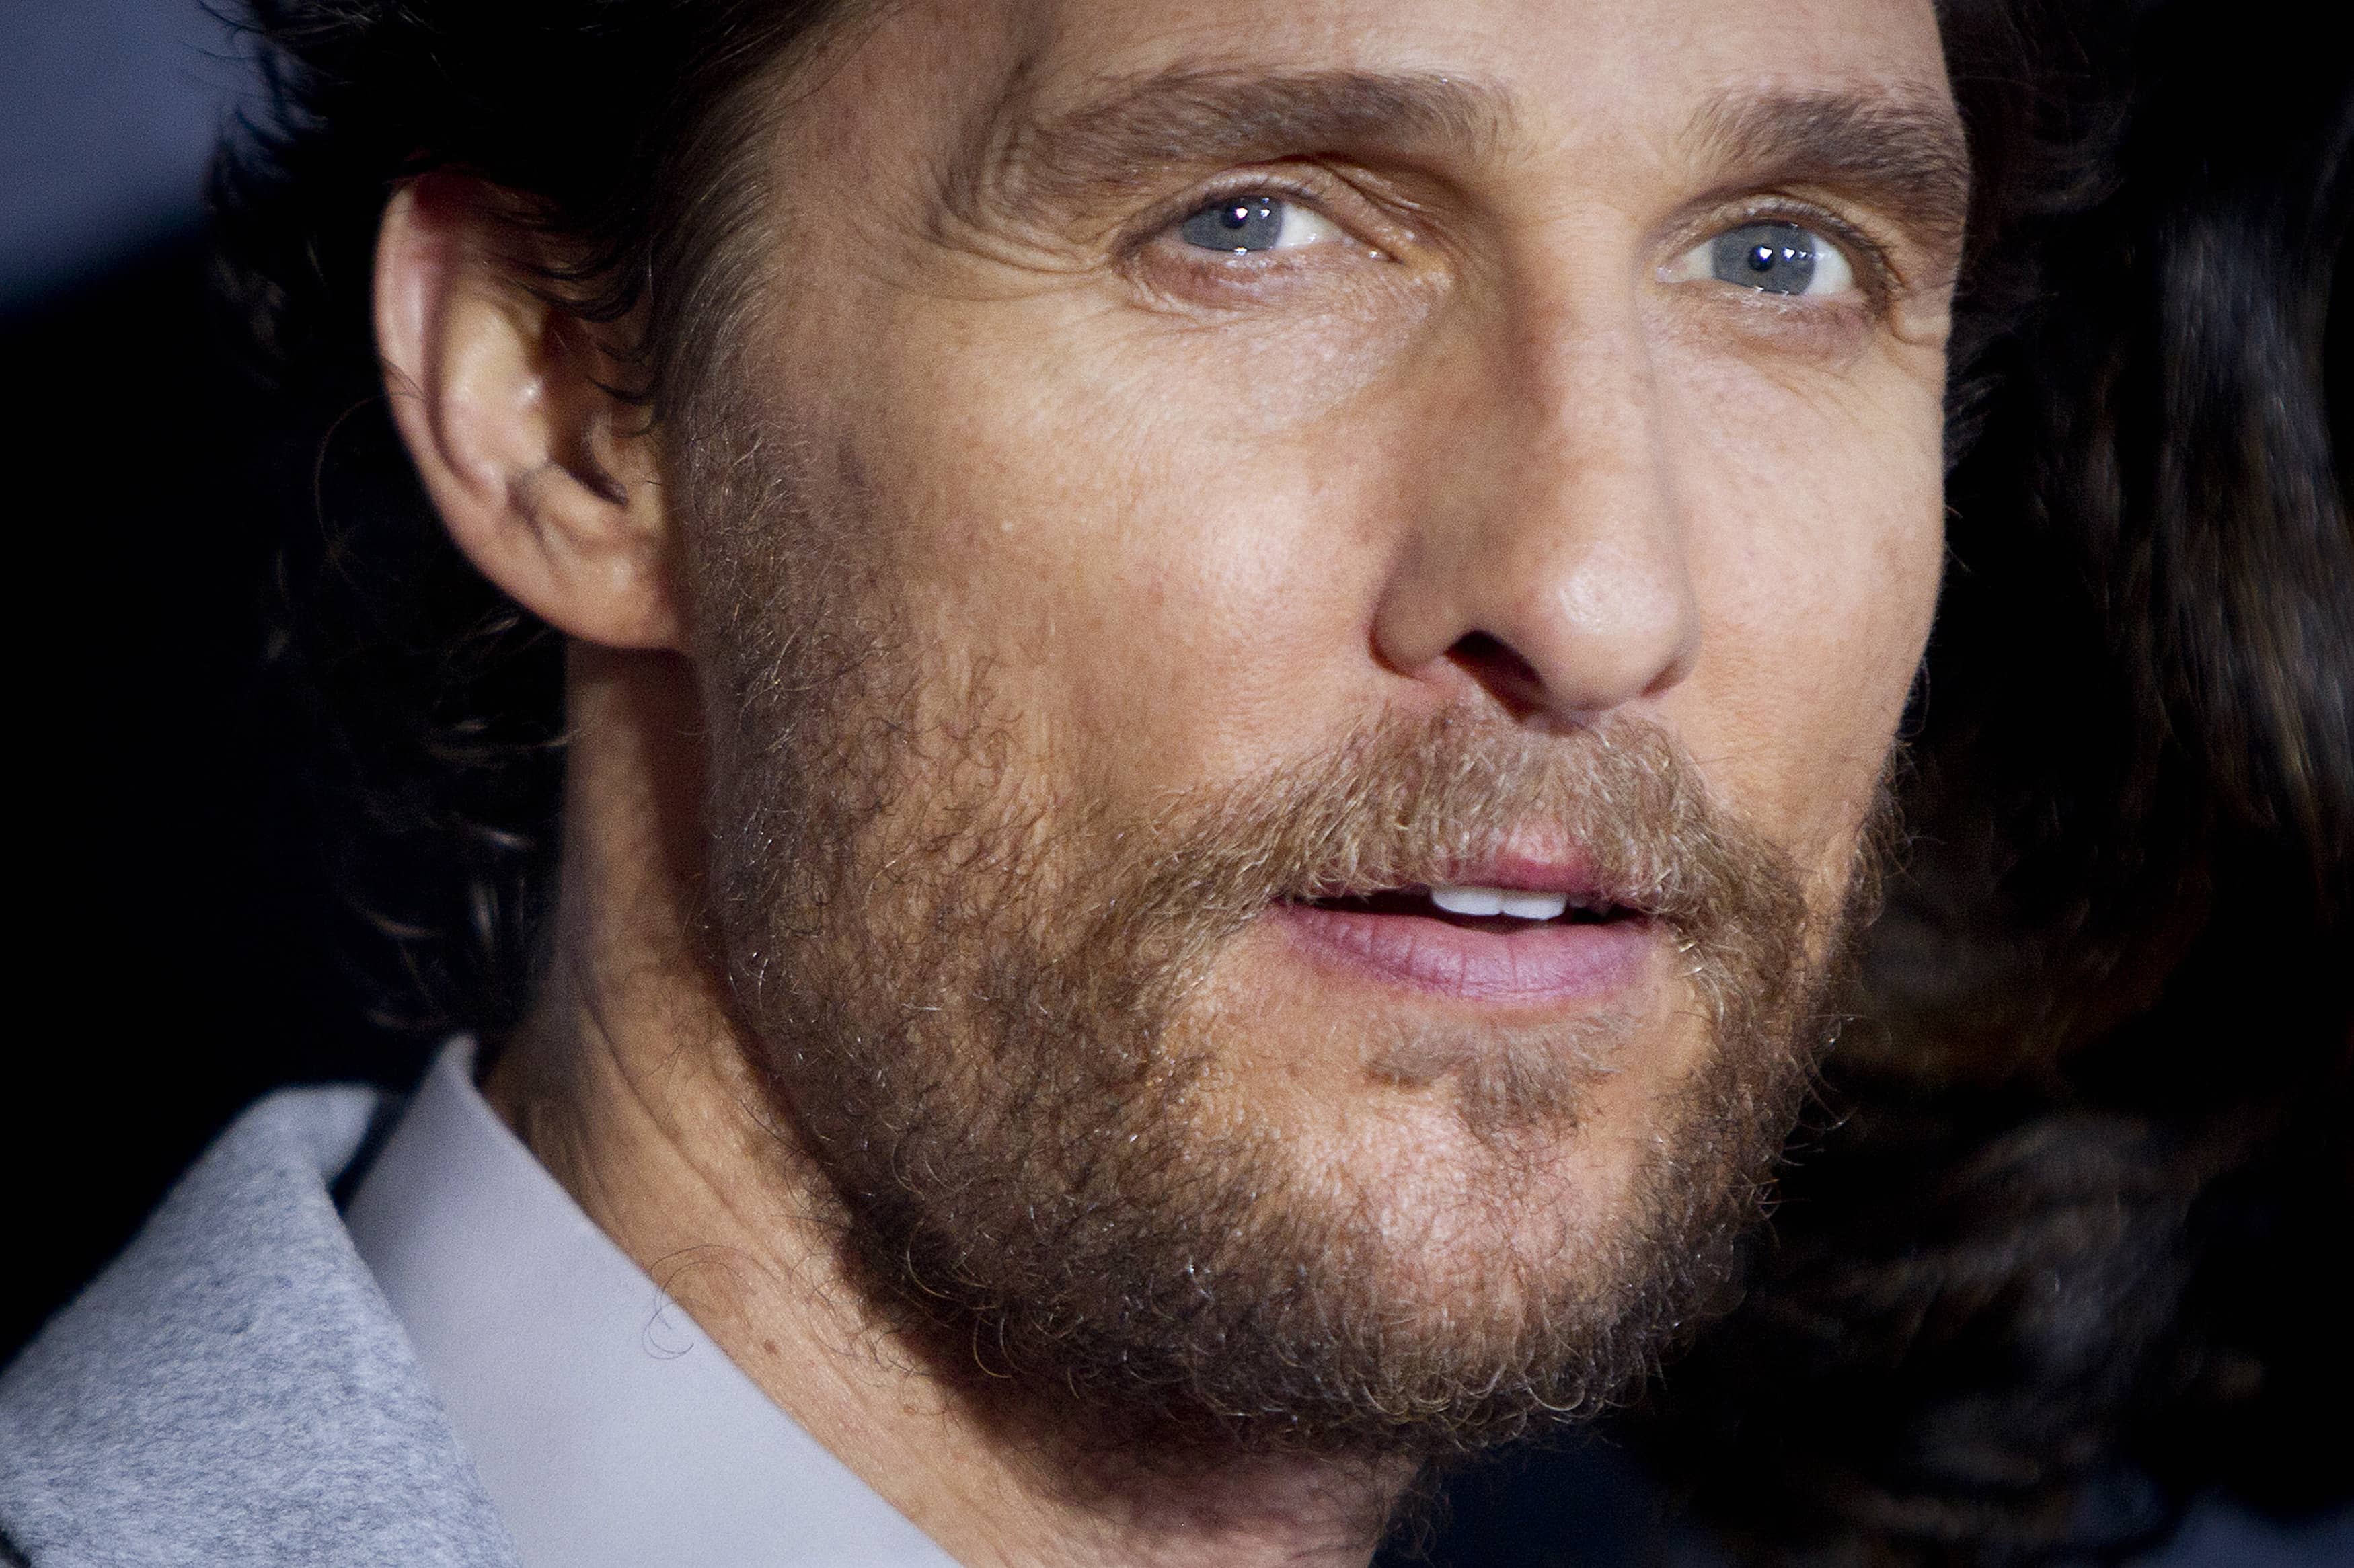 actor-matthew-mcconaughey-arrives-for-the-premiere-of-the-film-interstellar-in-new-york